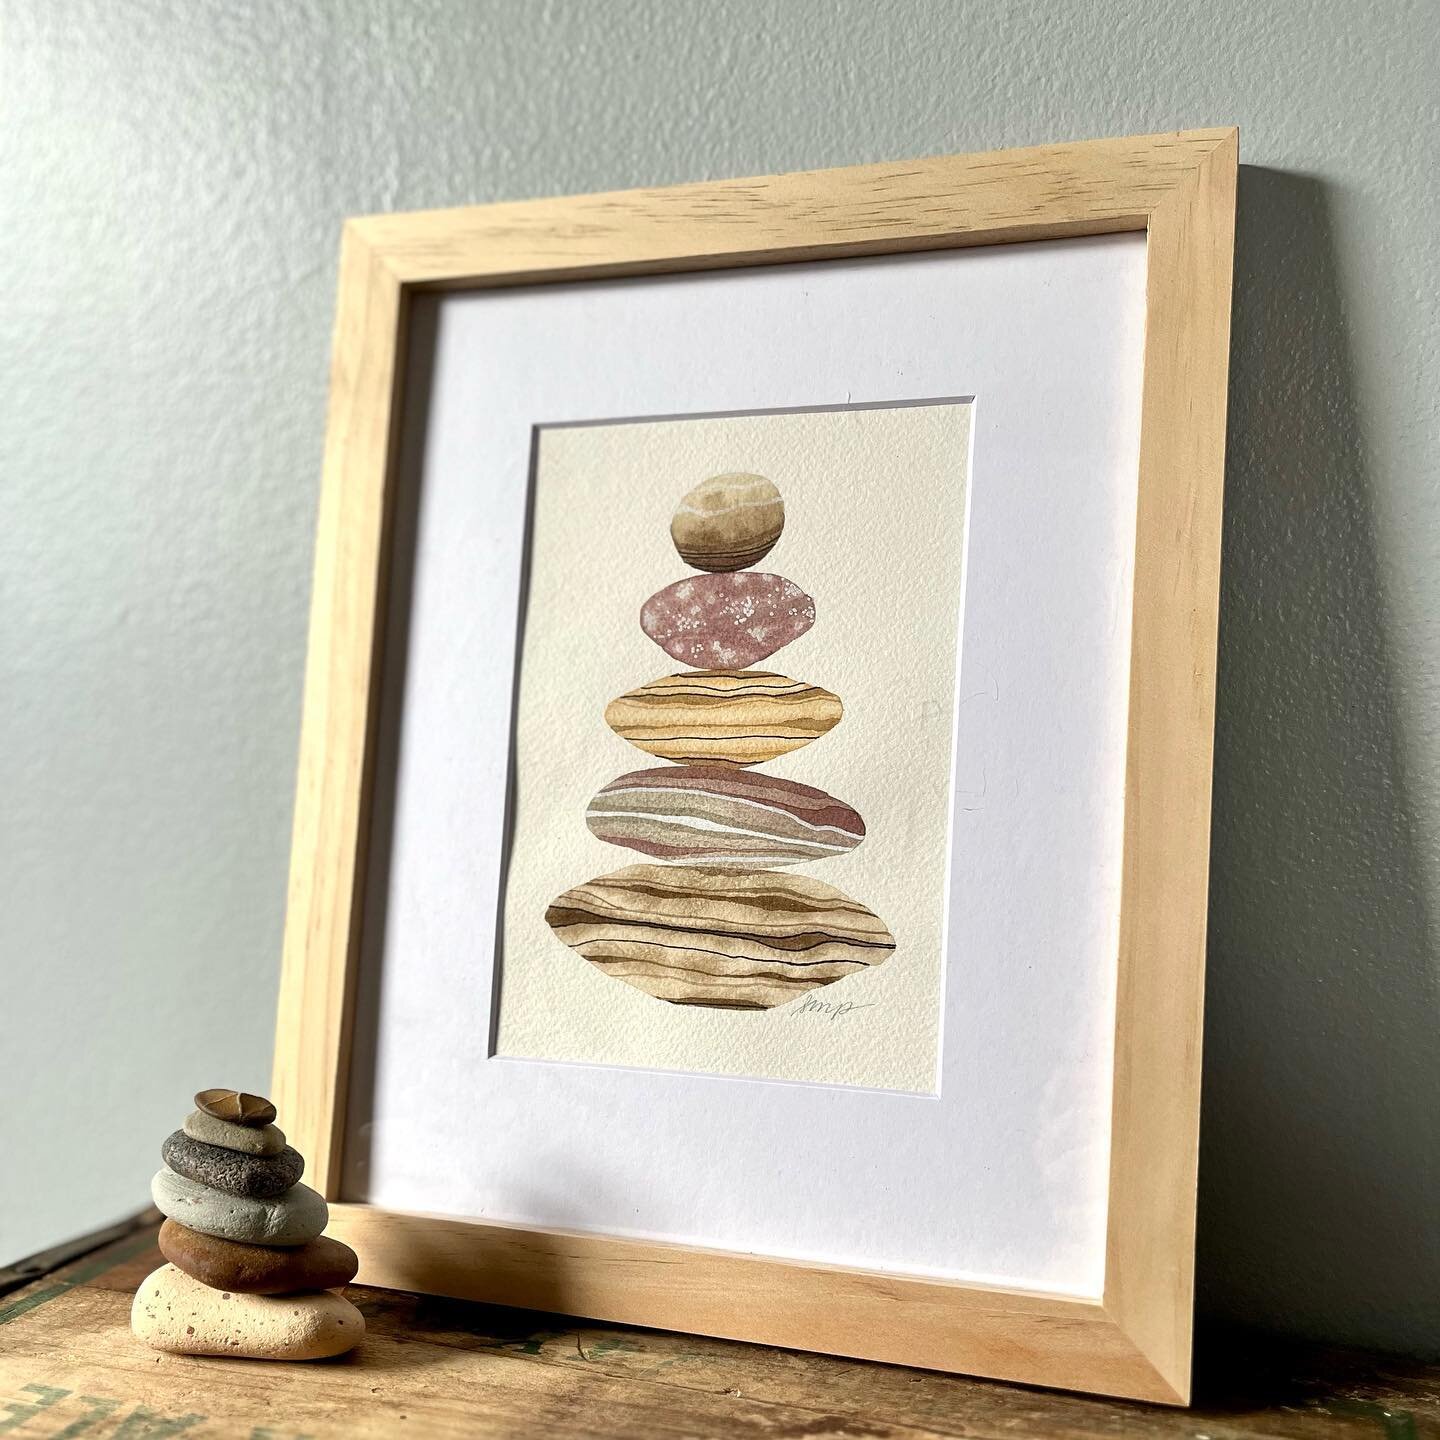 These Stone Stack painting are available. Comment or DM if you&rsquo;d like one! I will update this post with what is sold/available. 

If you&rsquo;re someone I see or you live close to Royal Oak, we can arrange pickup/delivery. Here&rsquo;s pricing